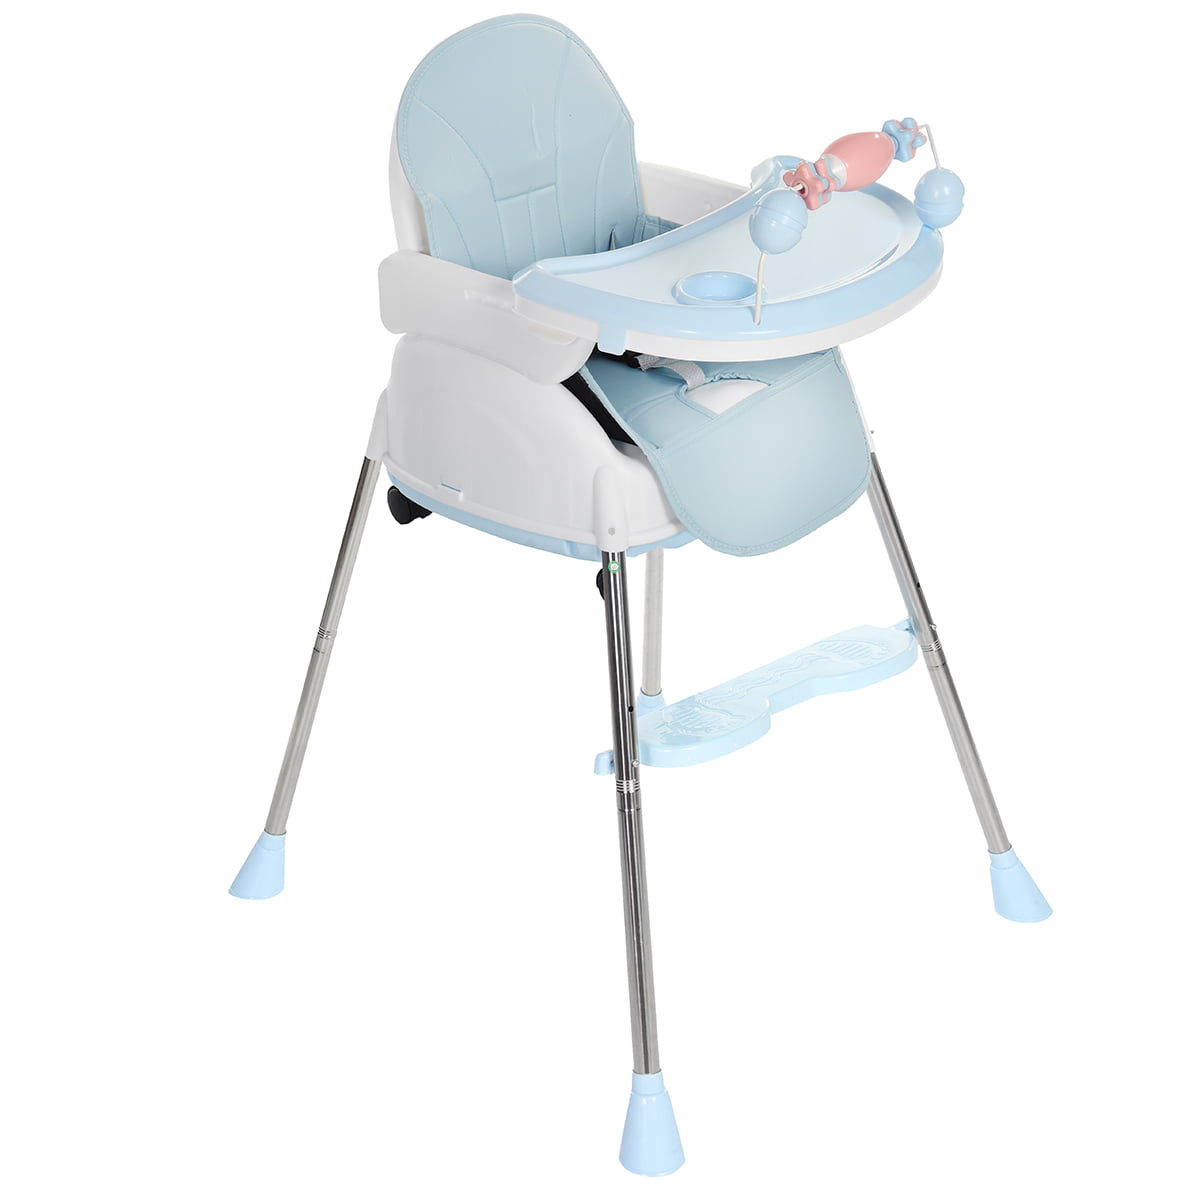 High Chairs Adjustable Kid Seat Foldable Baby Feeding Highchair Non-Slip Blue